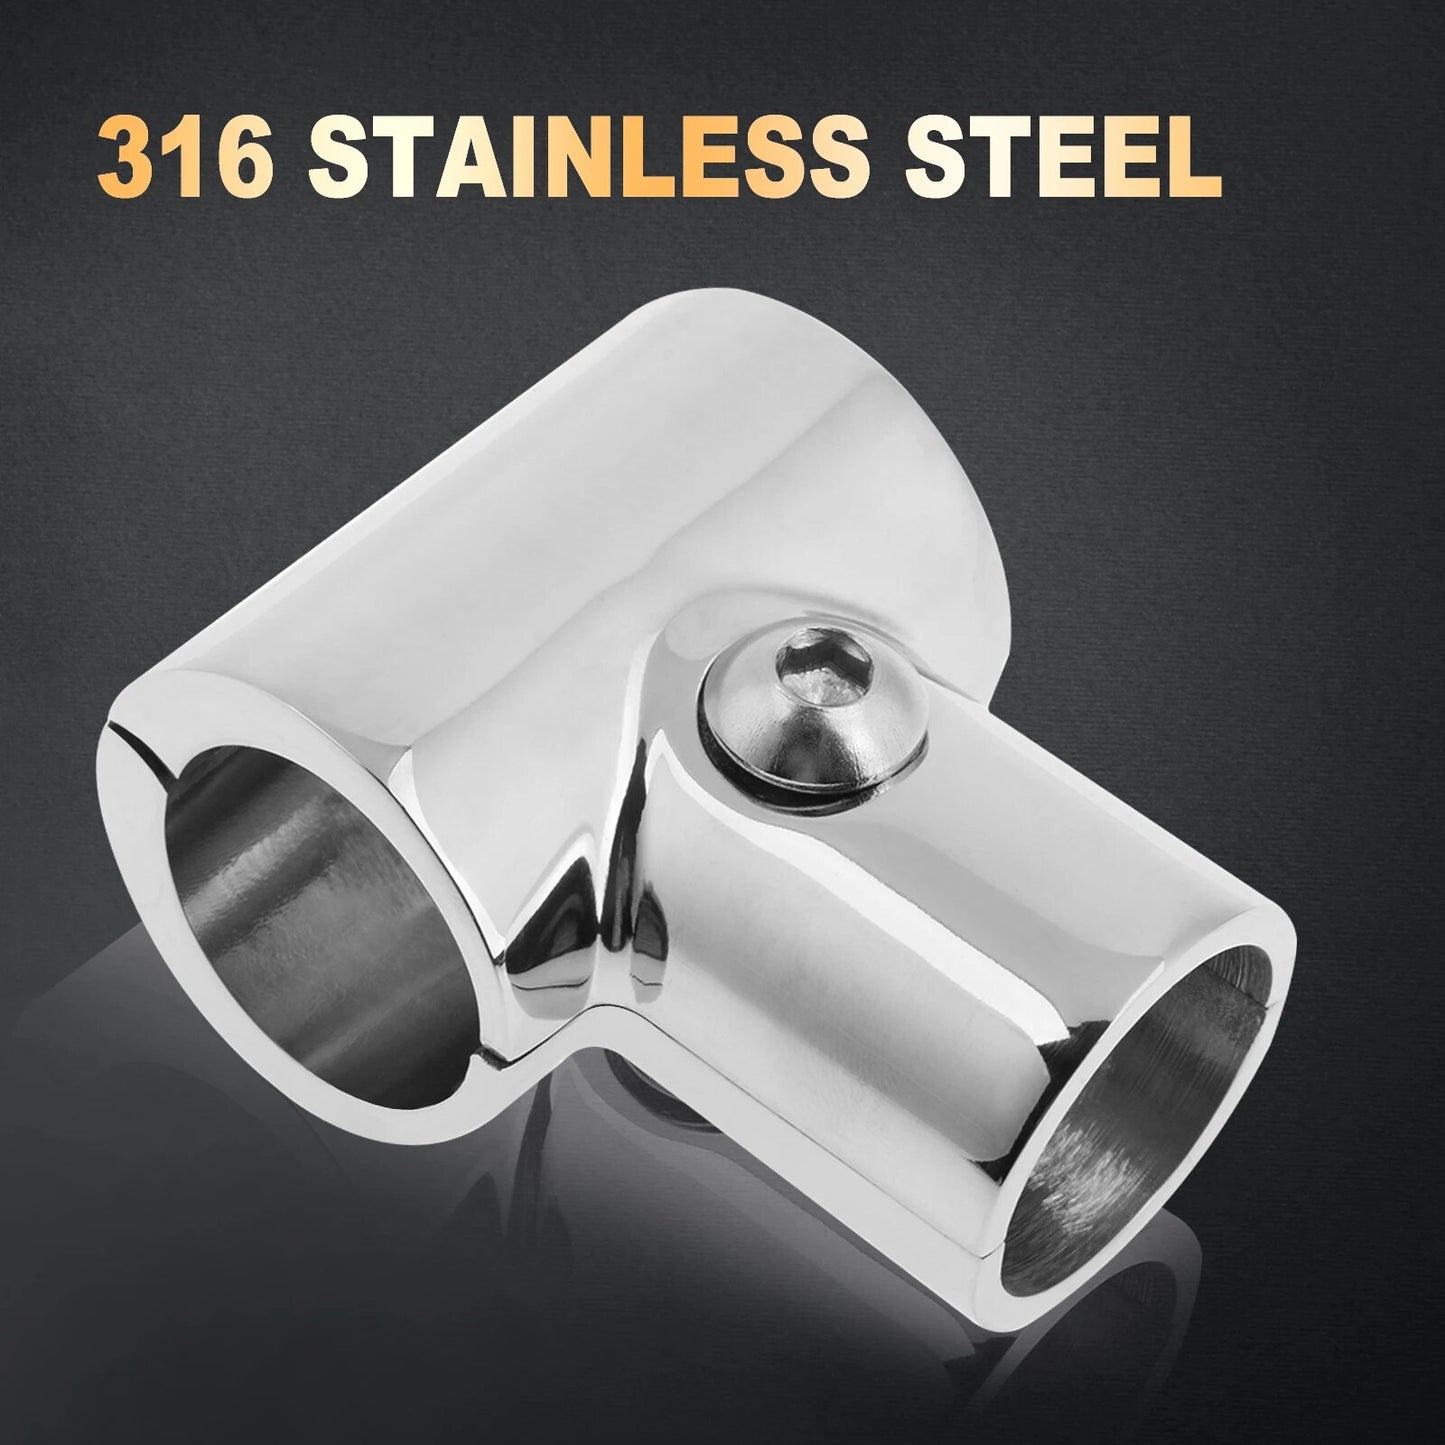 316 Stainless Steel Boat Marine Handrail 90 Degree Tee Fitting Hardware 25mm Tube Boat Accessories Hand Rail Fitting